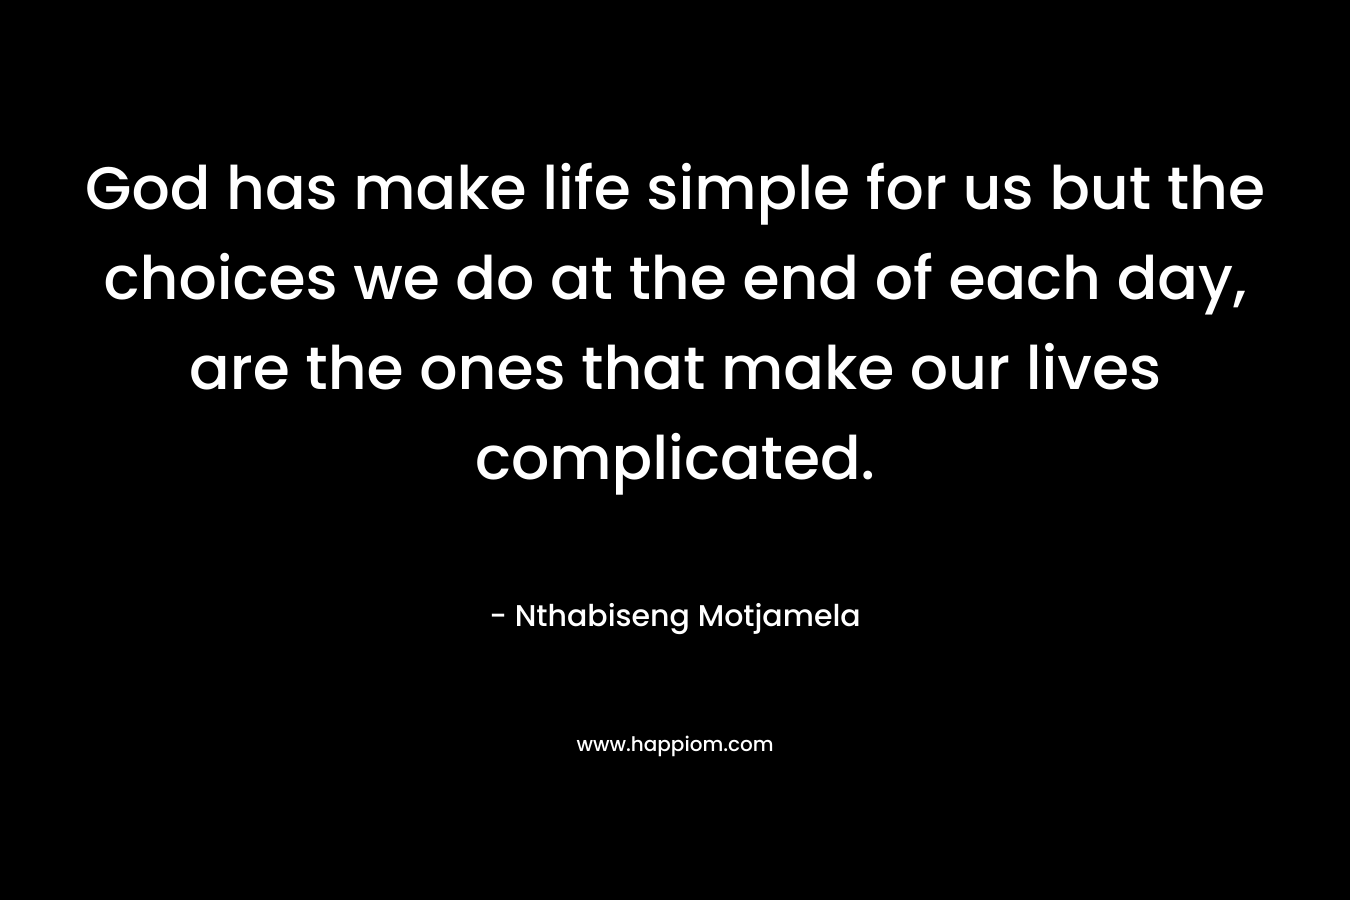 God has make life simple for us but the choices we do at the end of each day, are the ones that make our lives complicated.